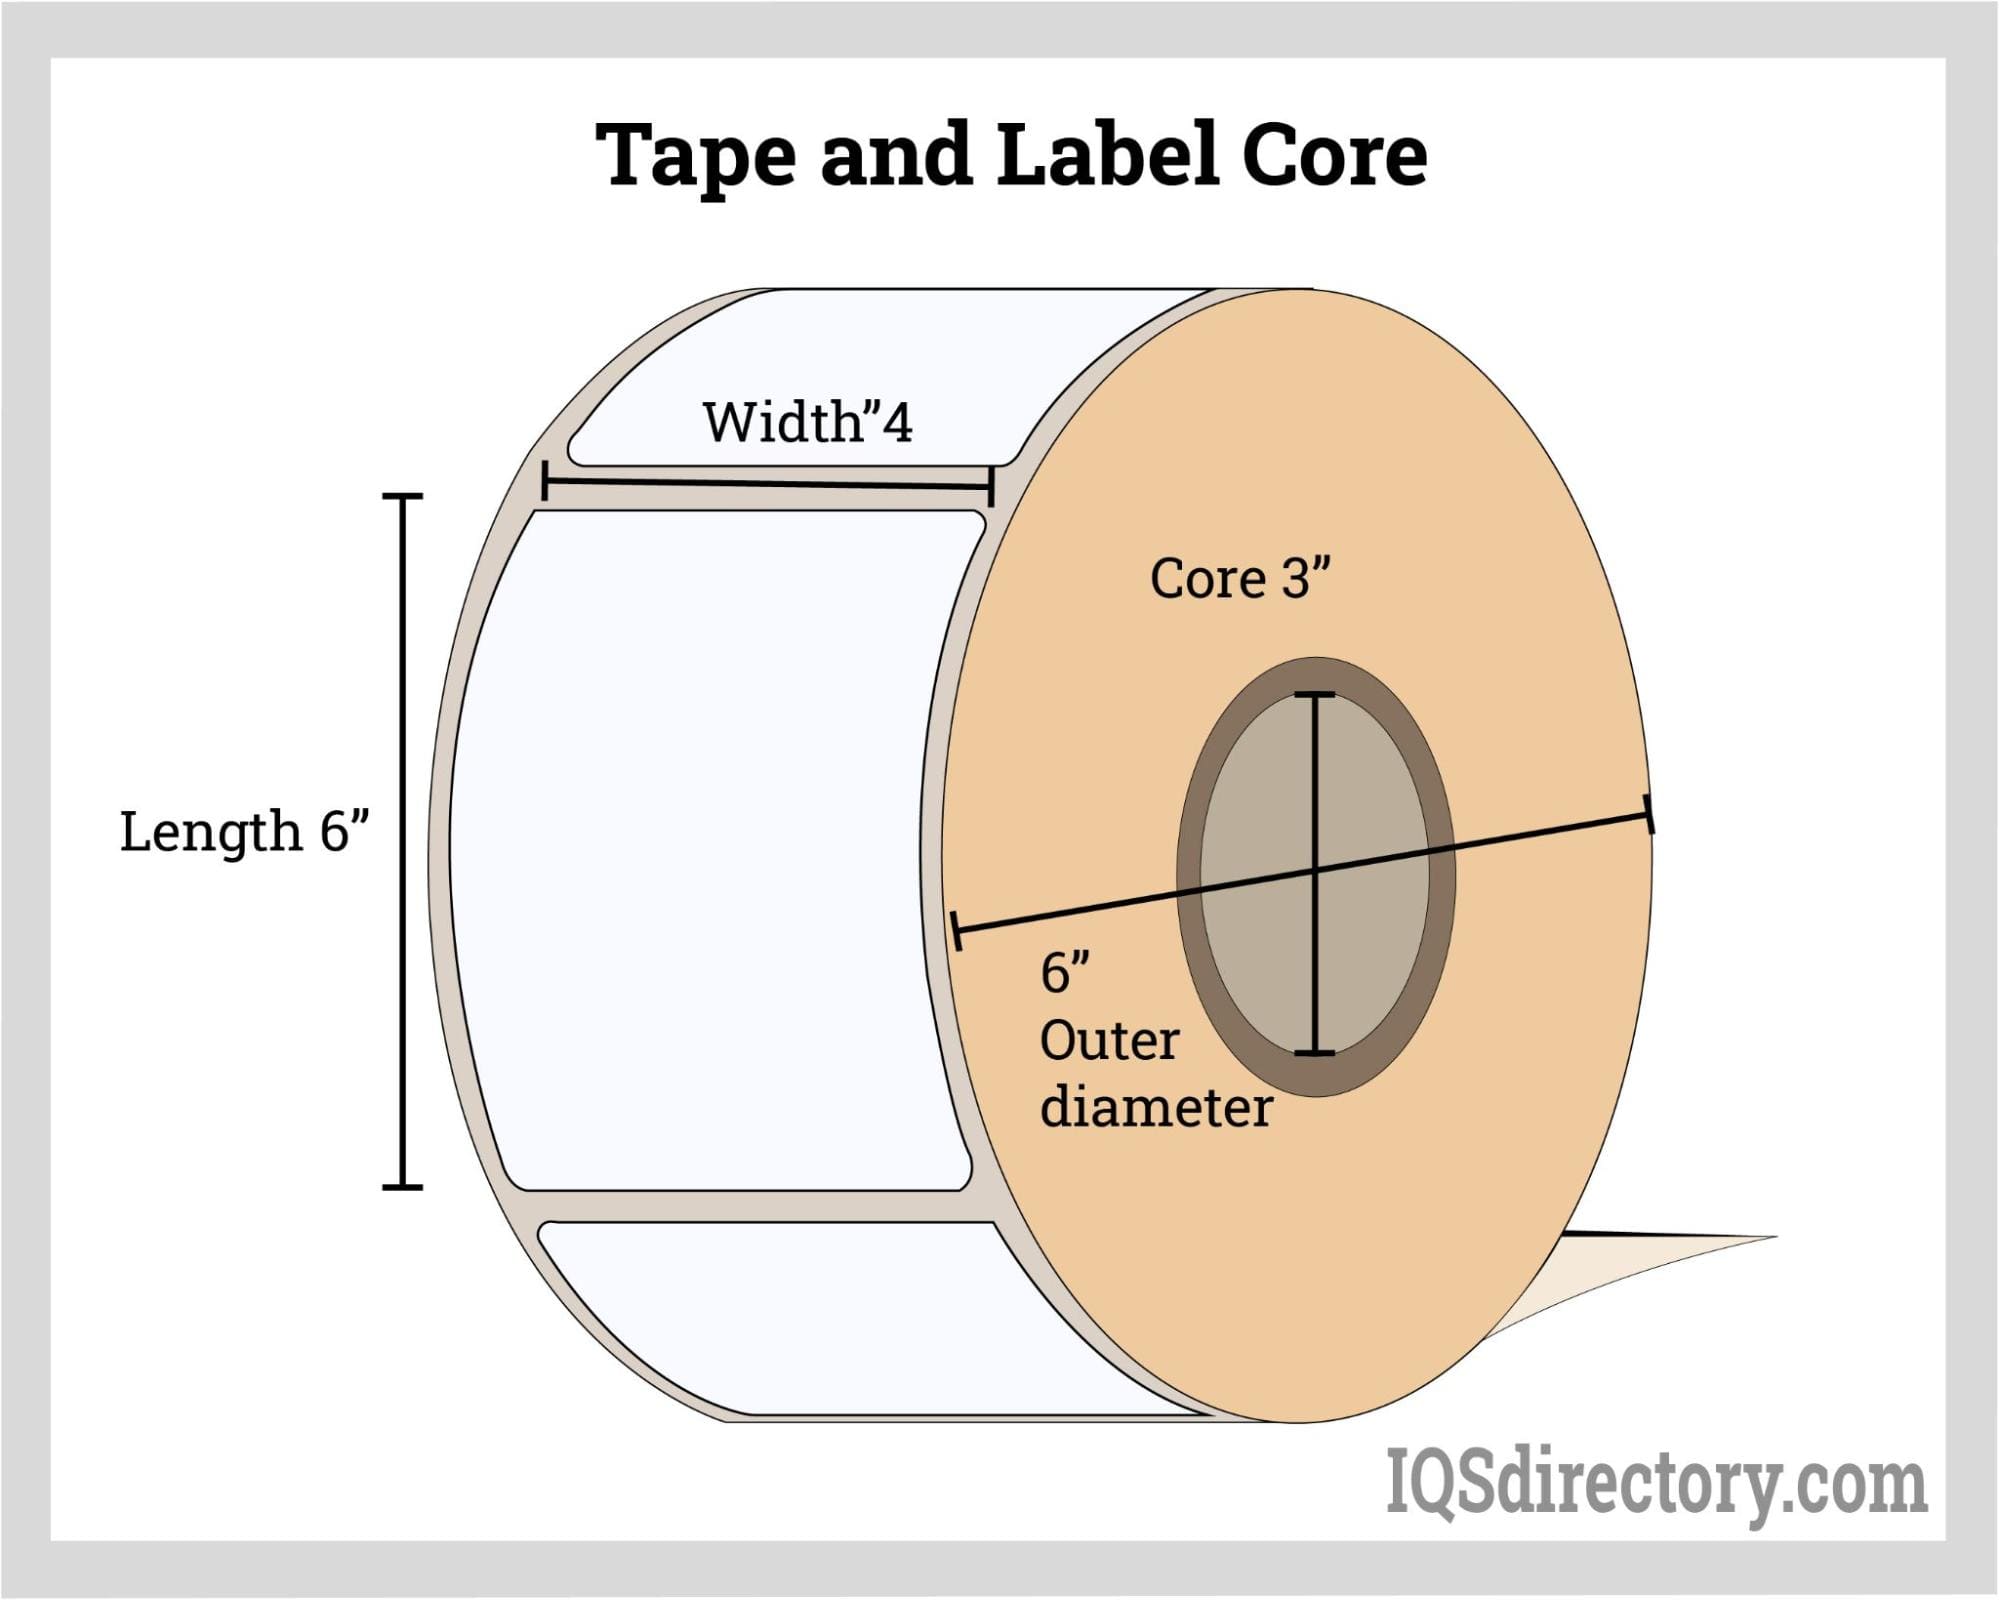 Tape and Label Cores